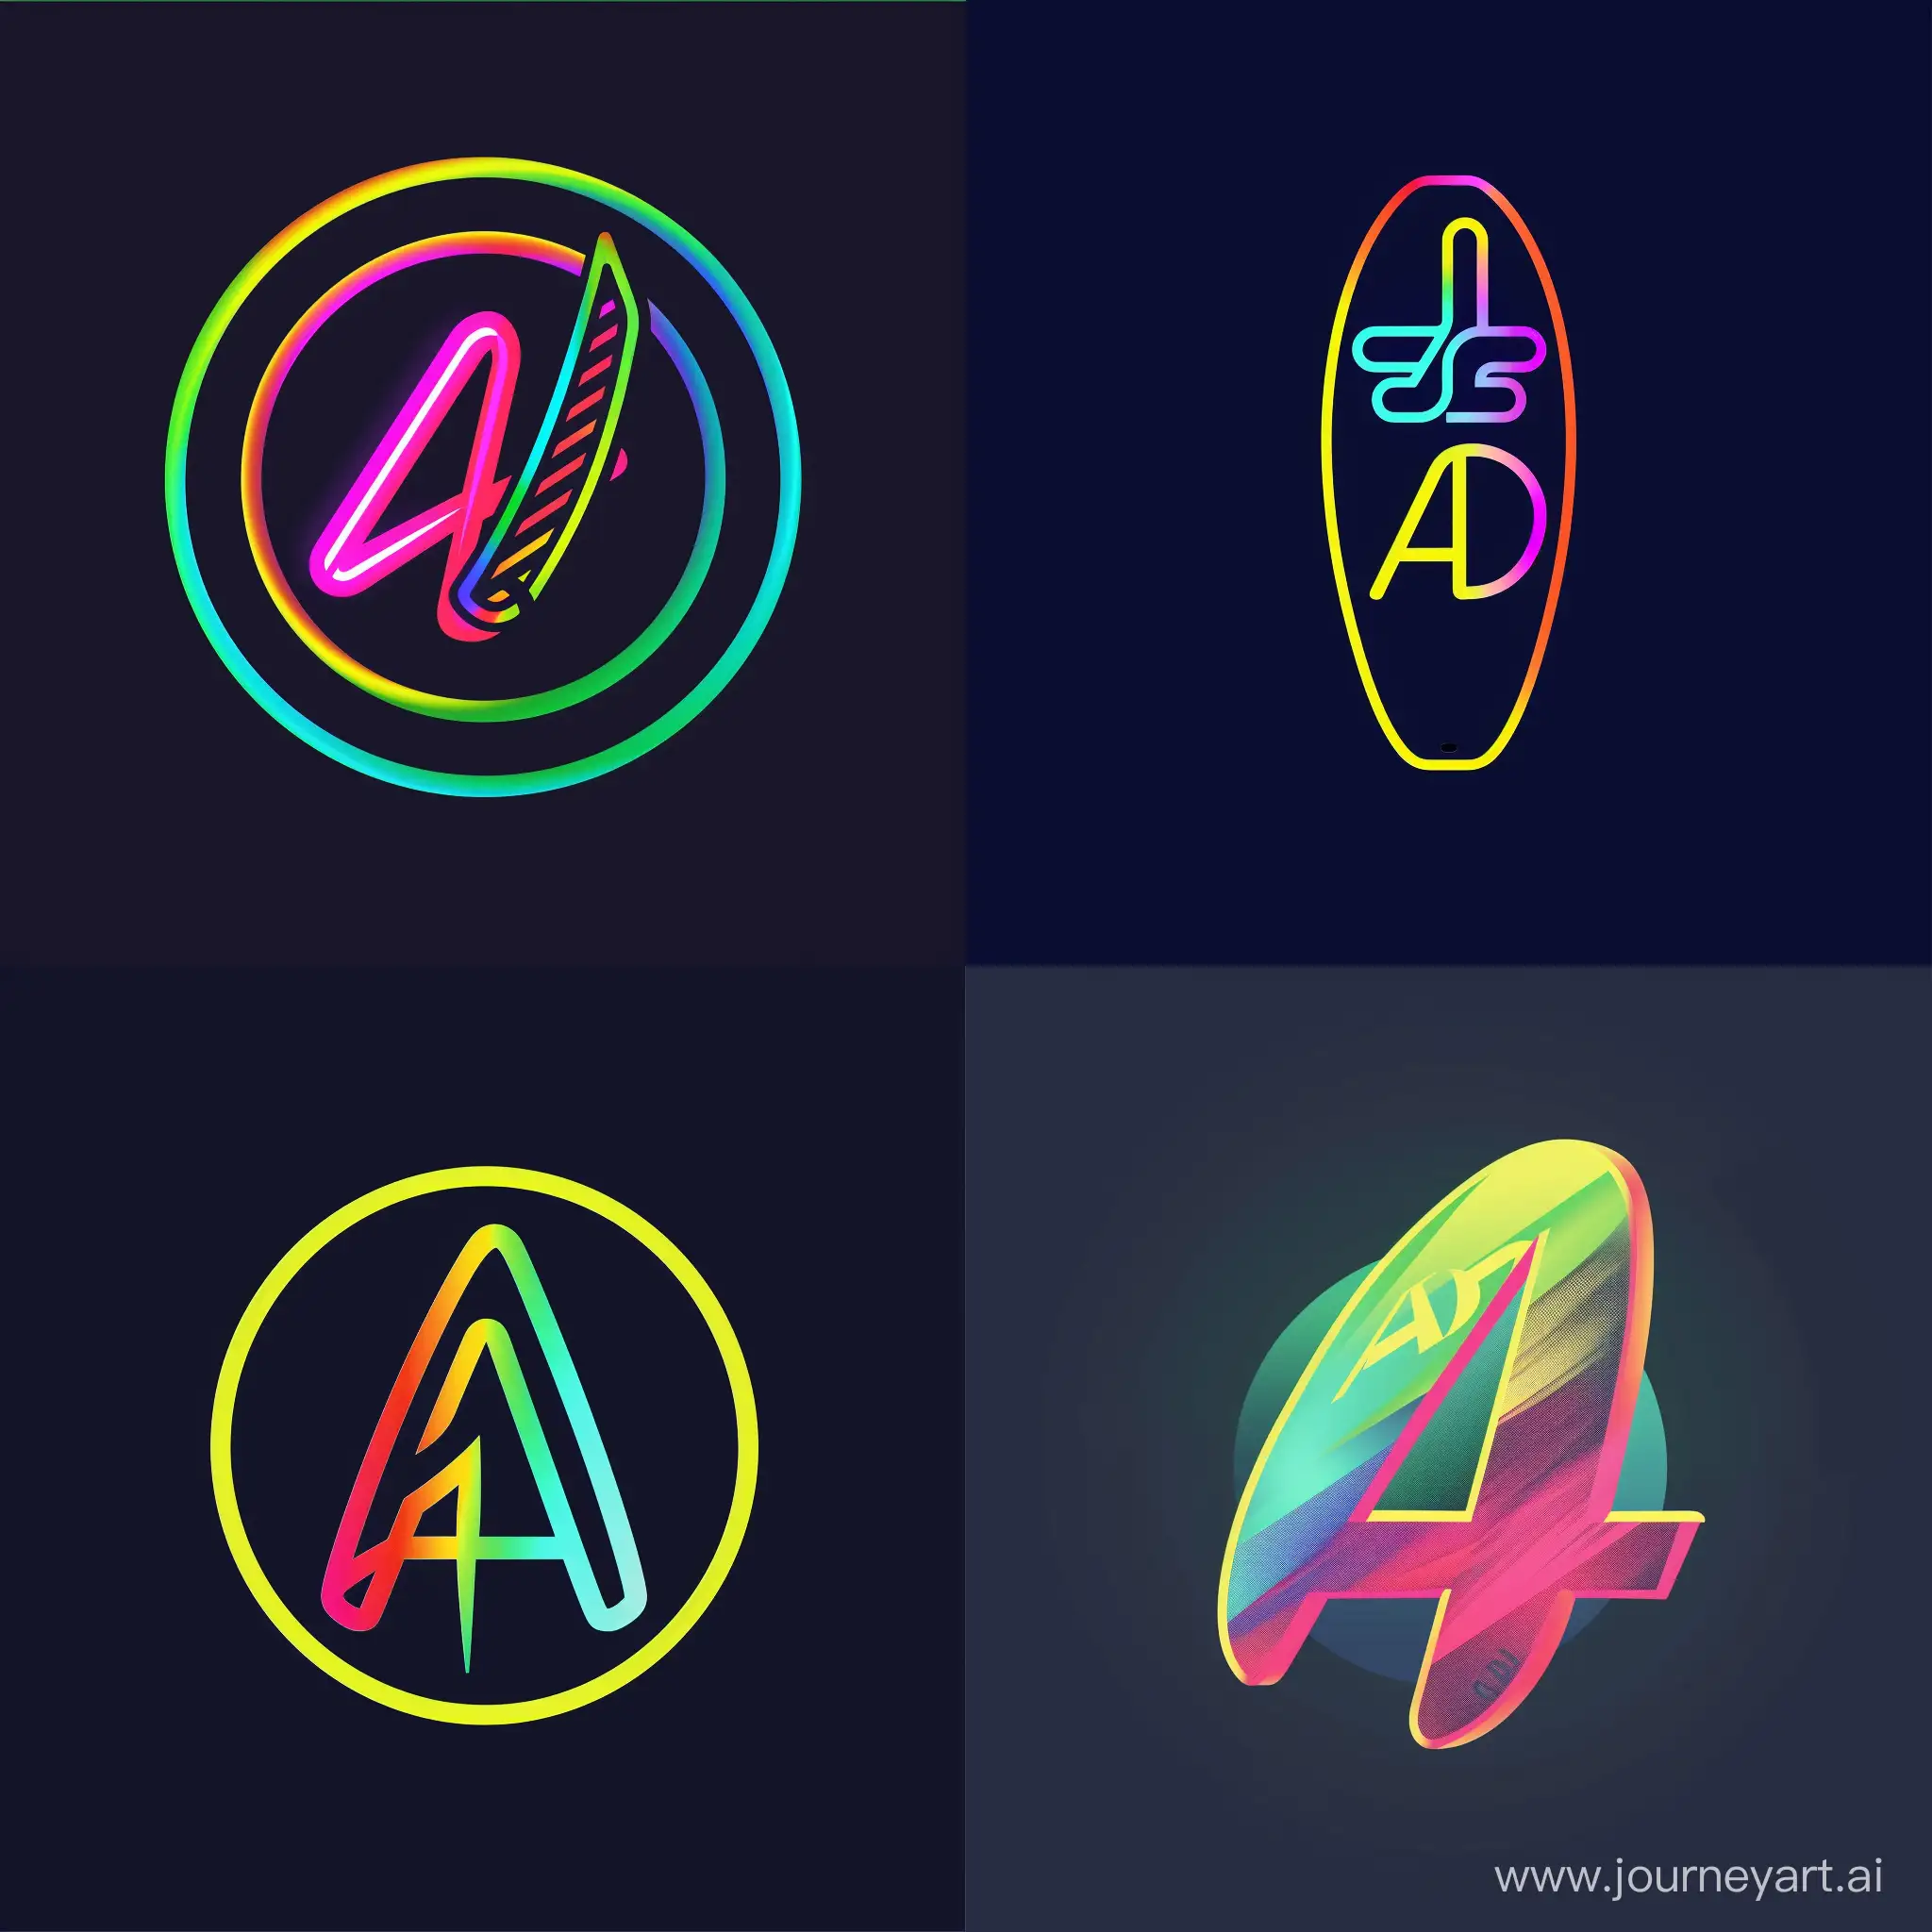 Logo in fluorescent colors for a SUP rental startup called "AD". название "AquaDrive"